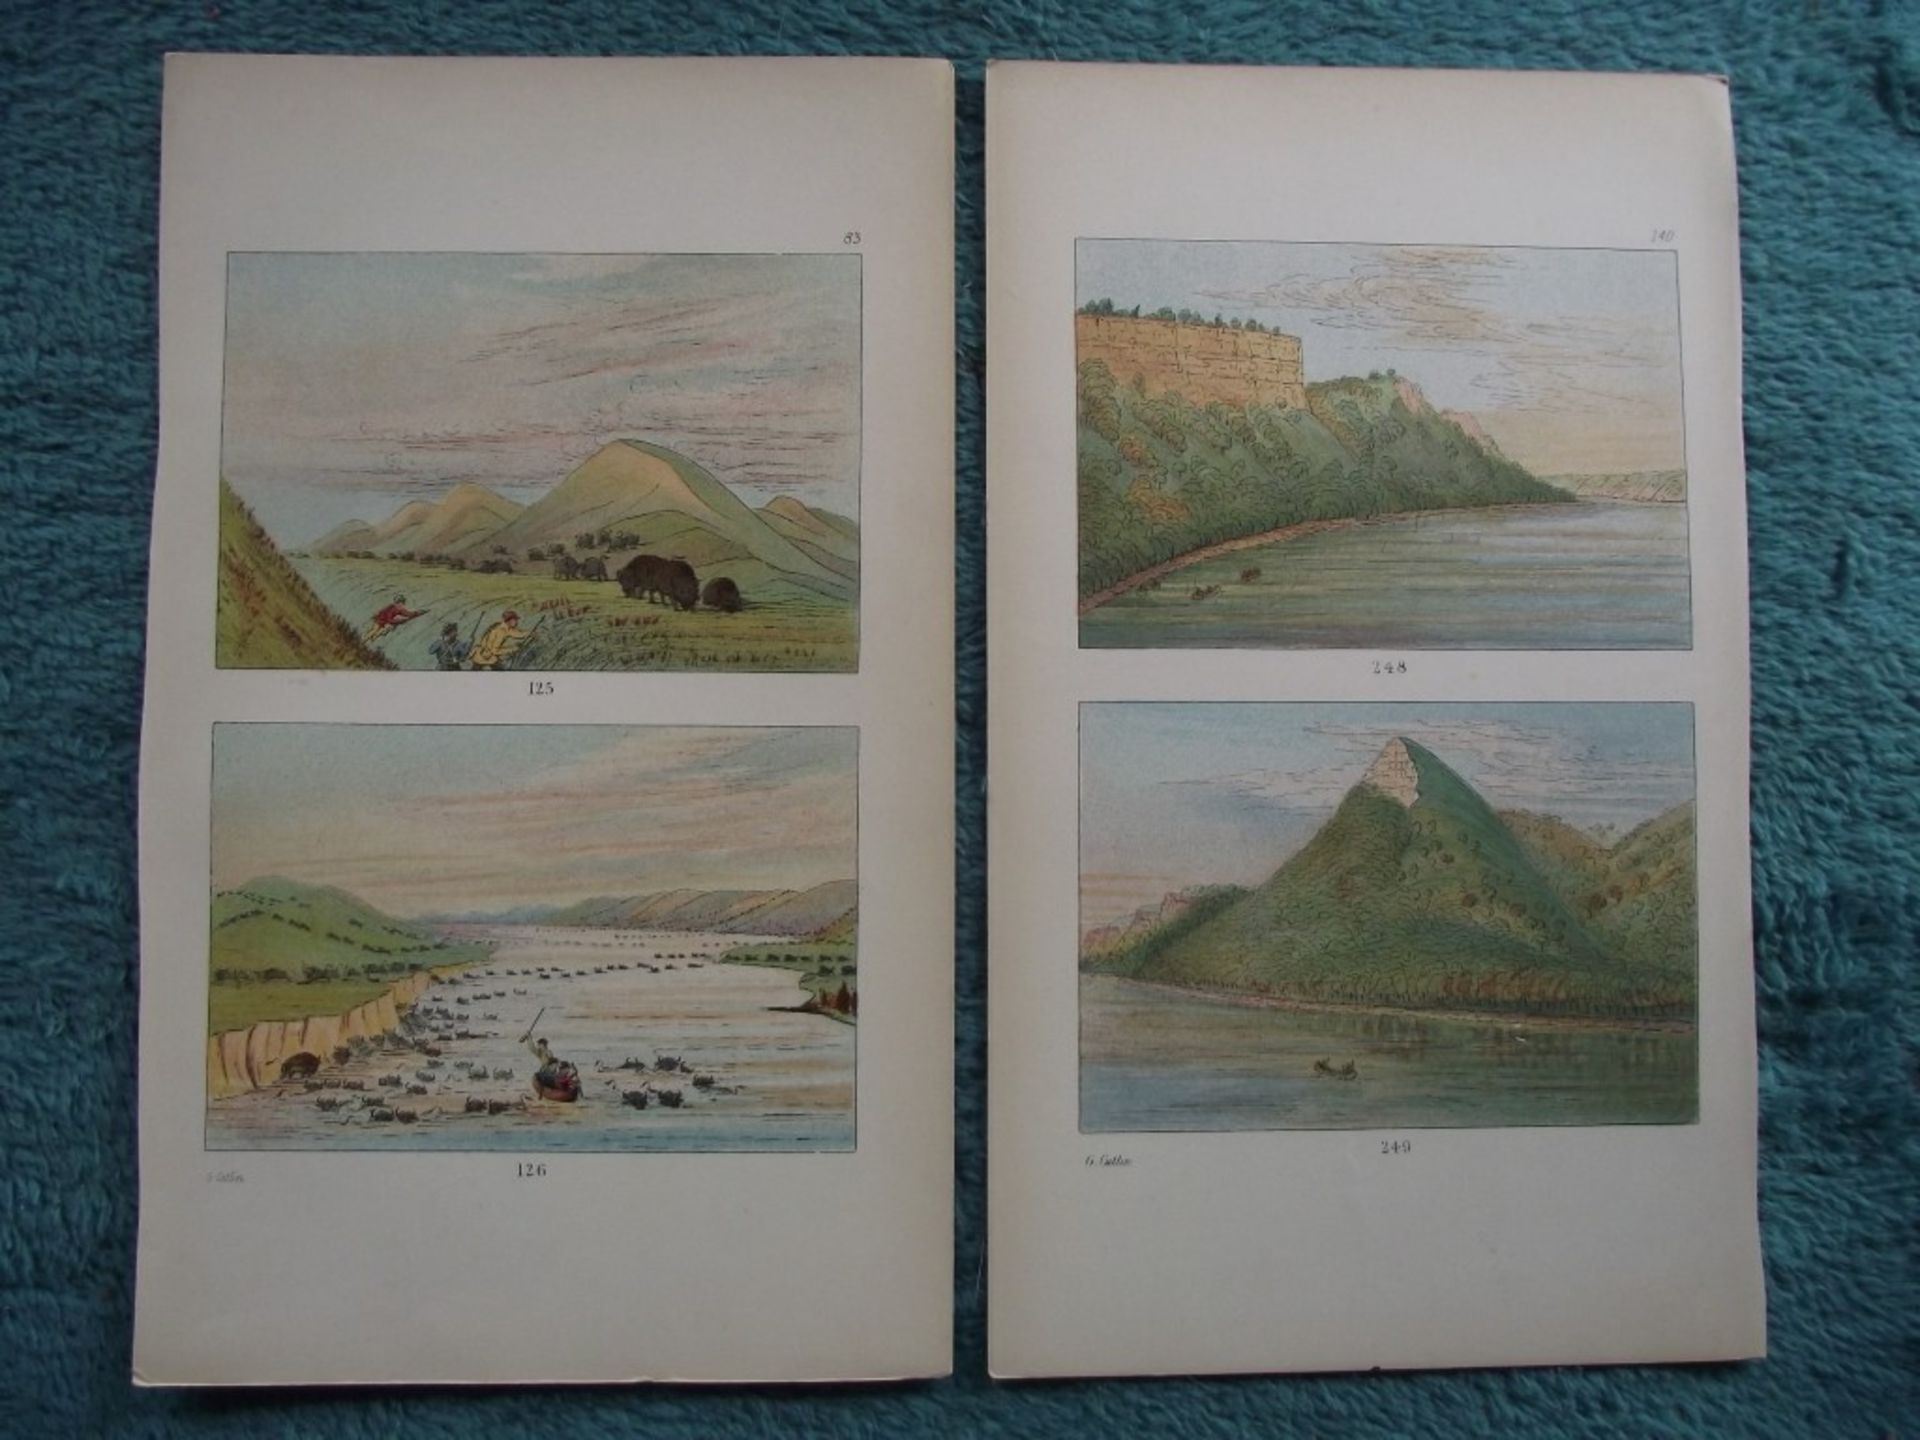 65 X book plates - George Catlin - Illustrations of the North American Indians - Circa 1876 - Image 20 of 40